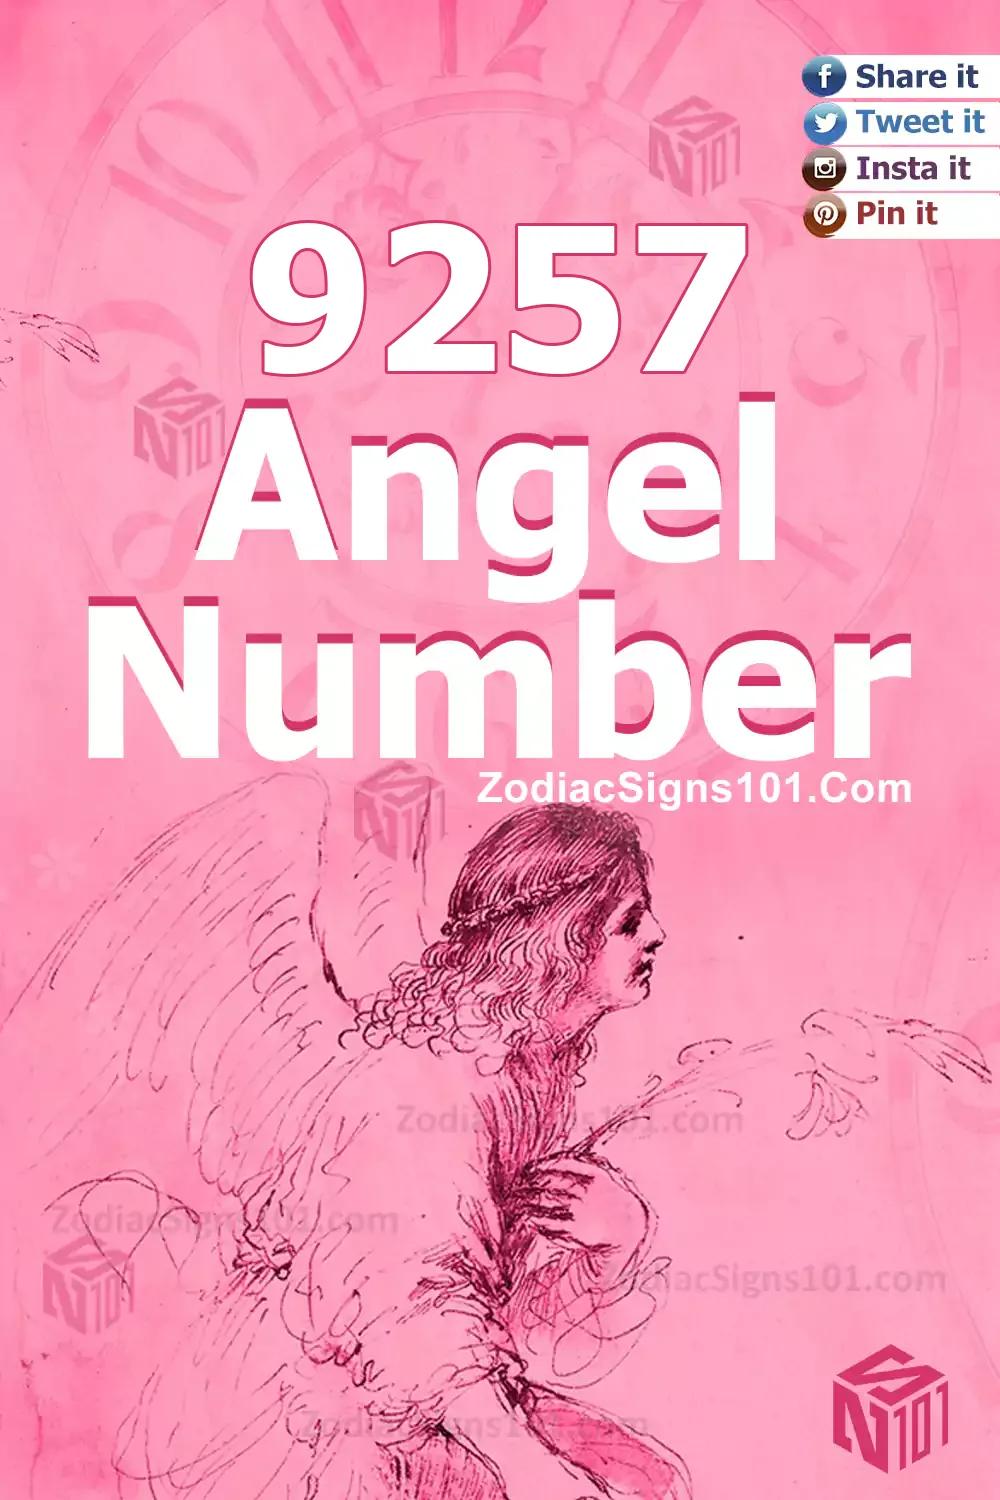 9257 Angel Number Meaning